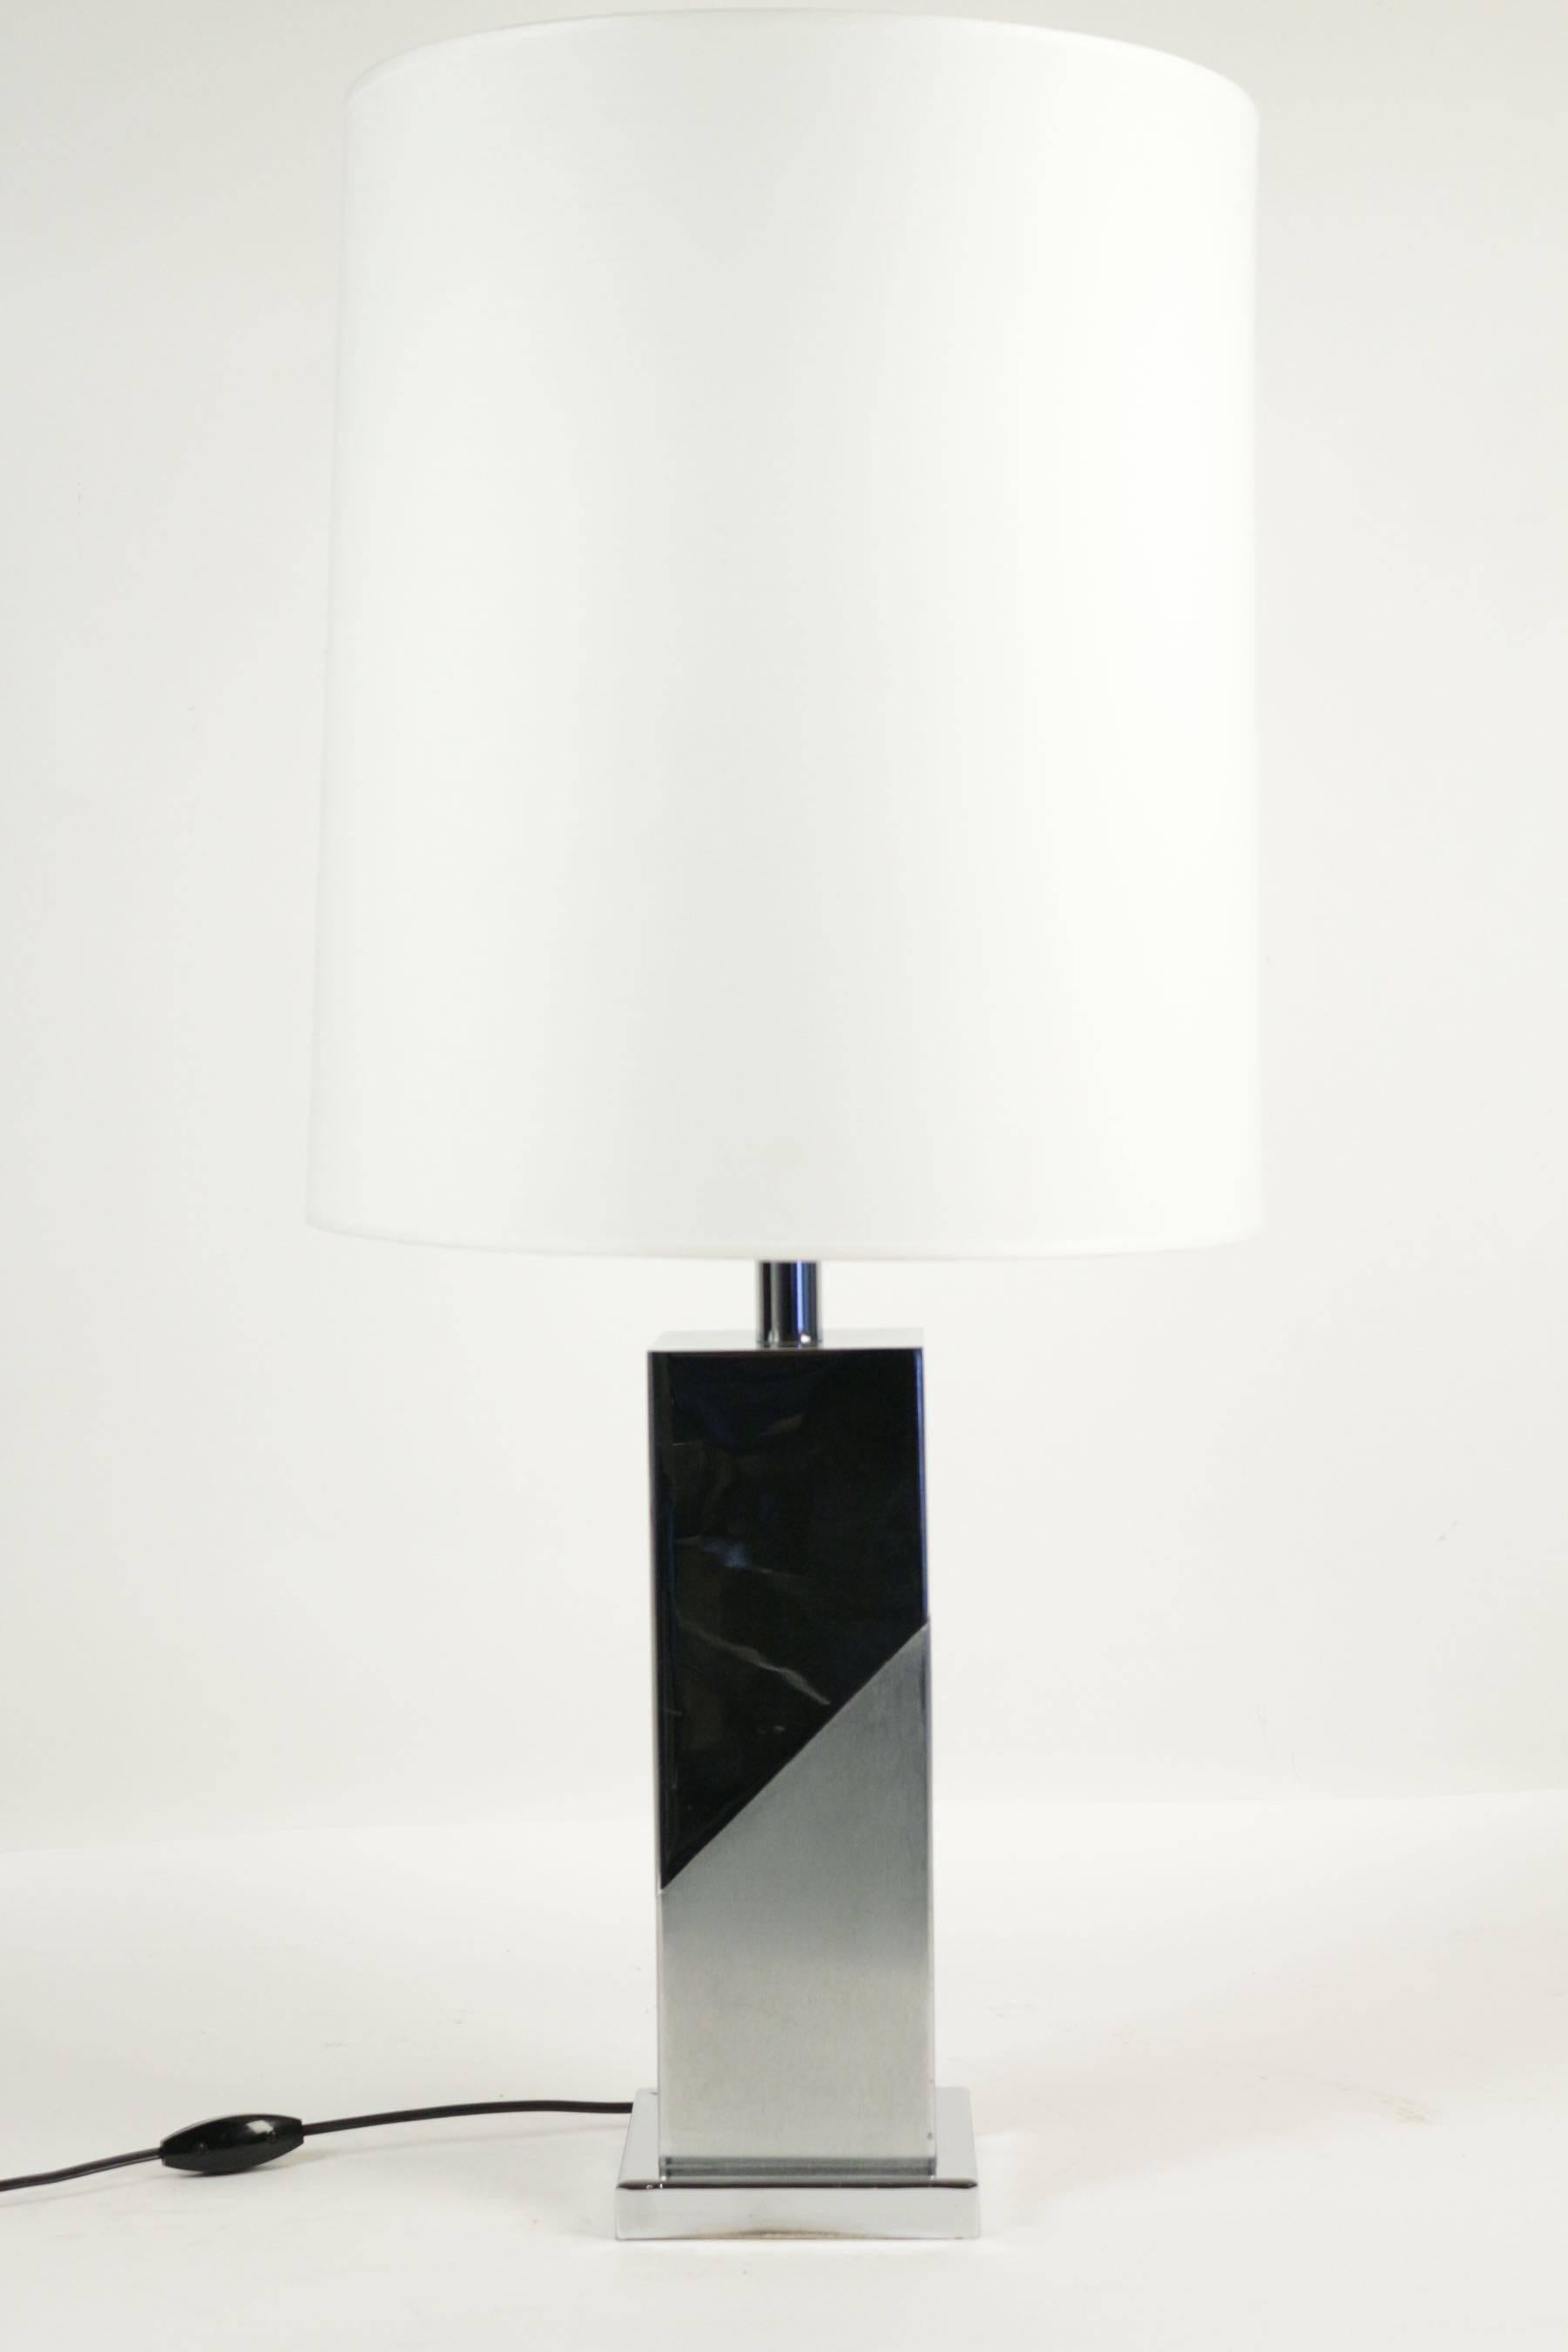 French Lamp Inspired by the Cubist Movement or Brutalist